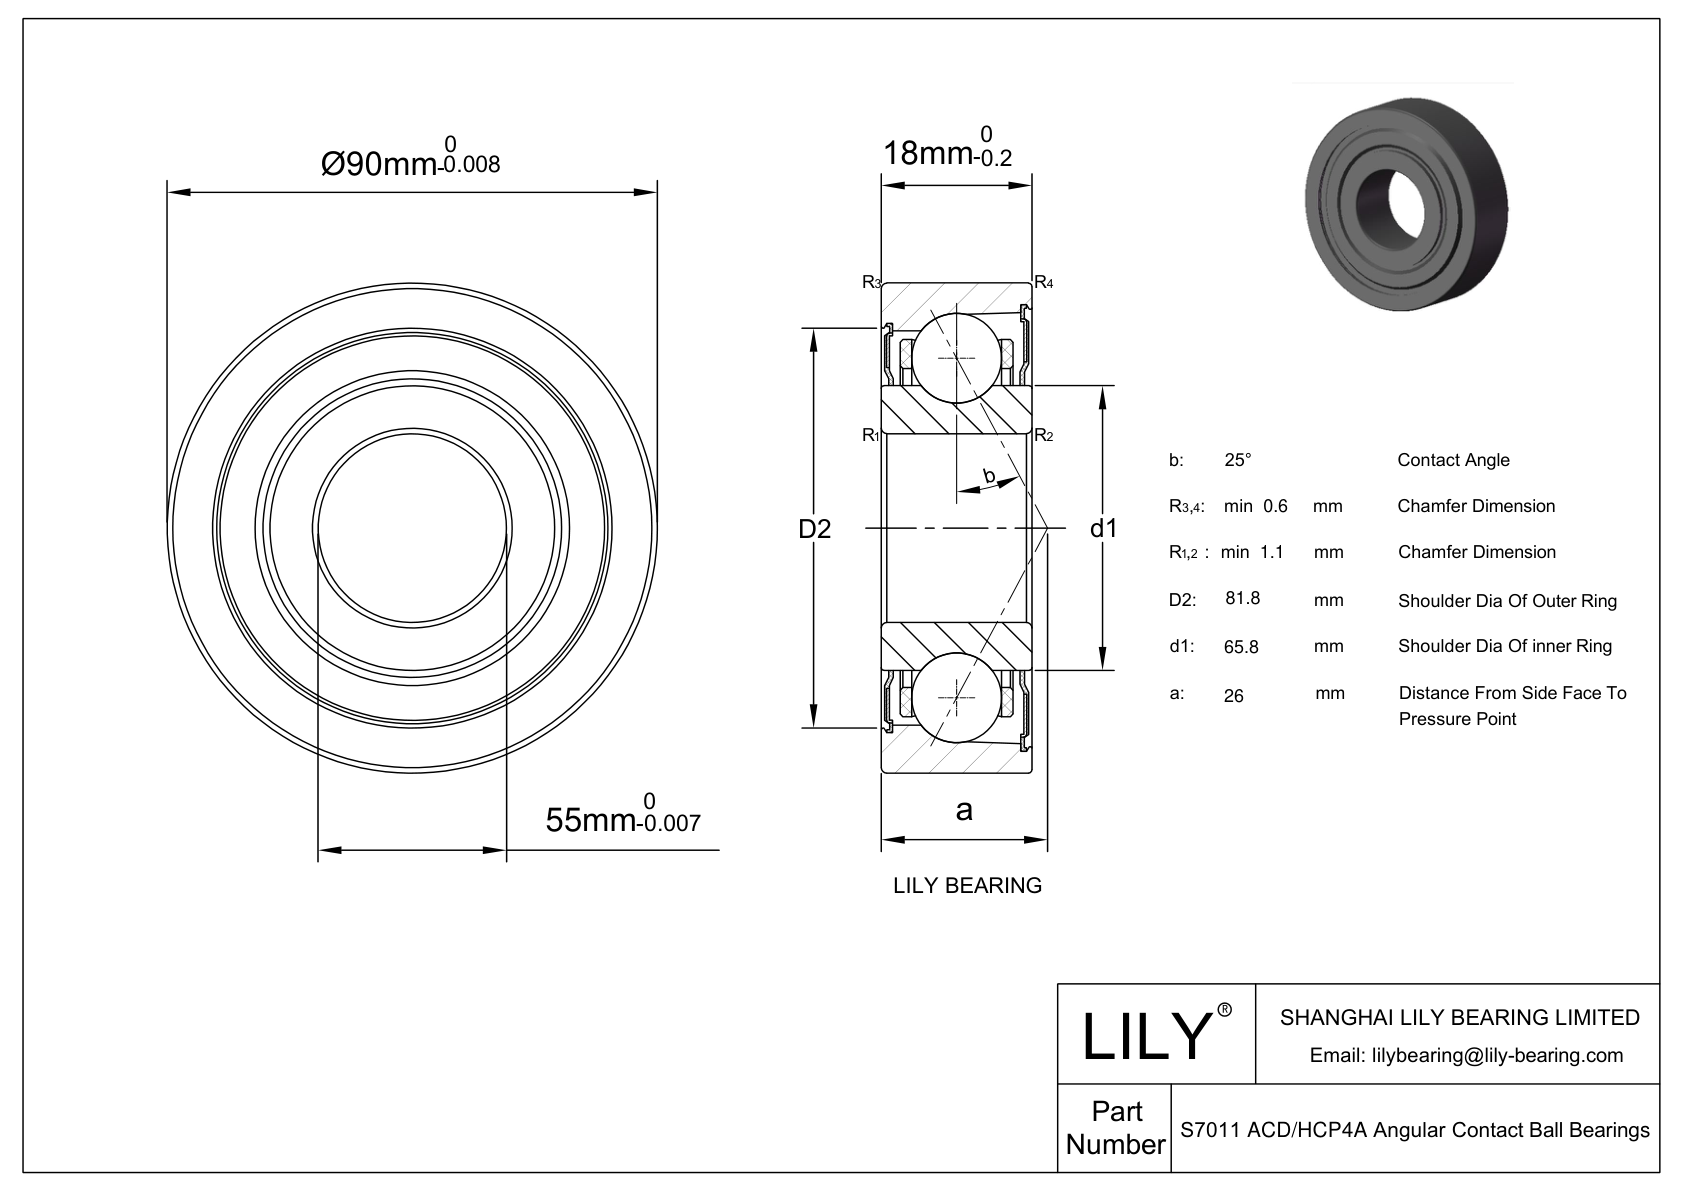 S7011 ACD/HCP4A Super Precision Angular Contact Ball Bearings cad drawing